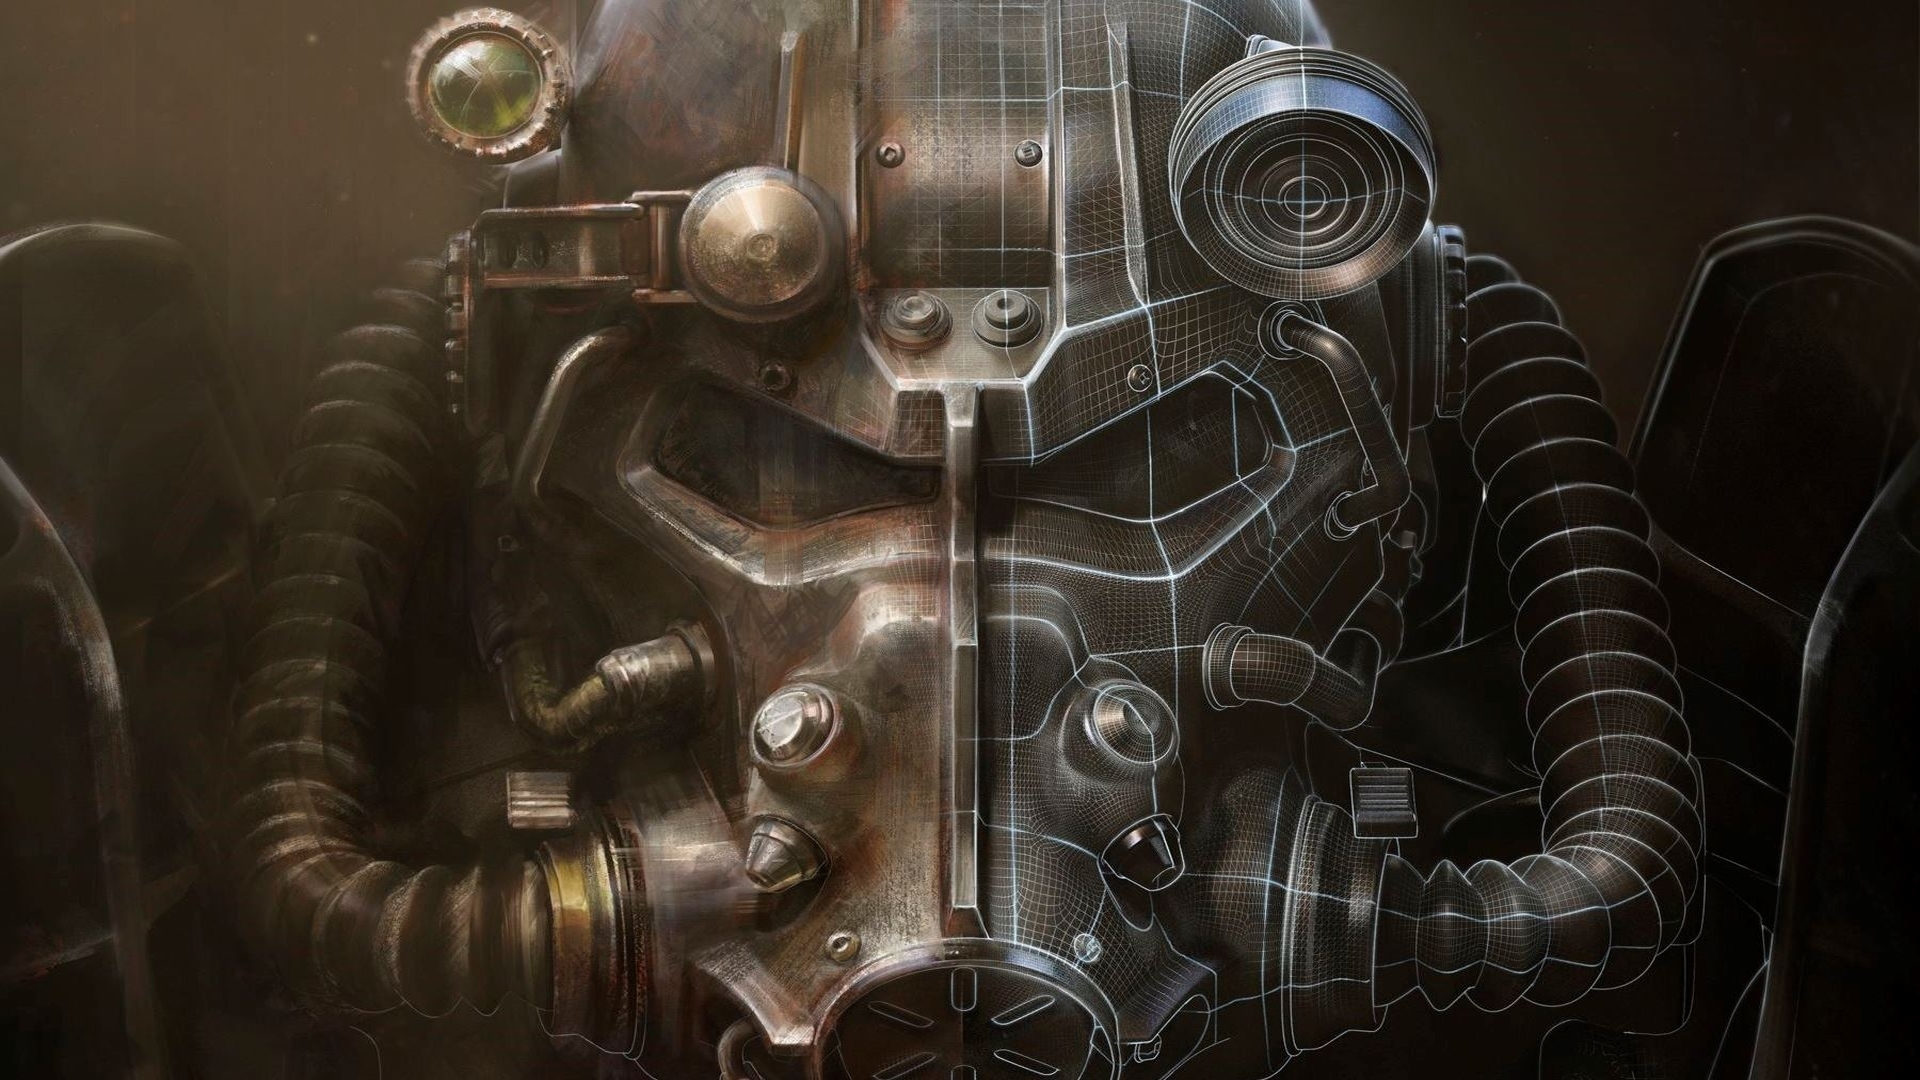 Wallpaper Fallout Bethesda Softworks Armor Full HD 1080p